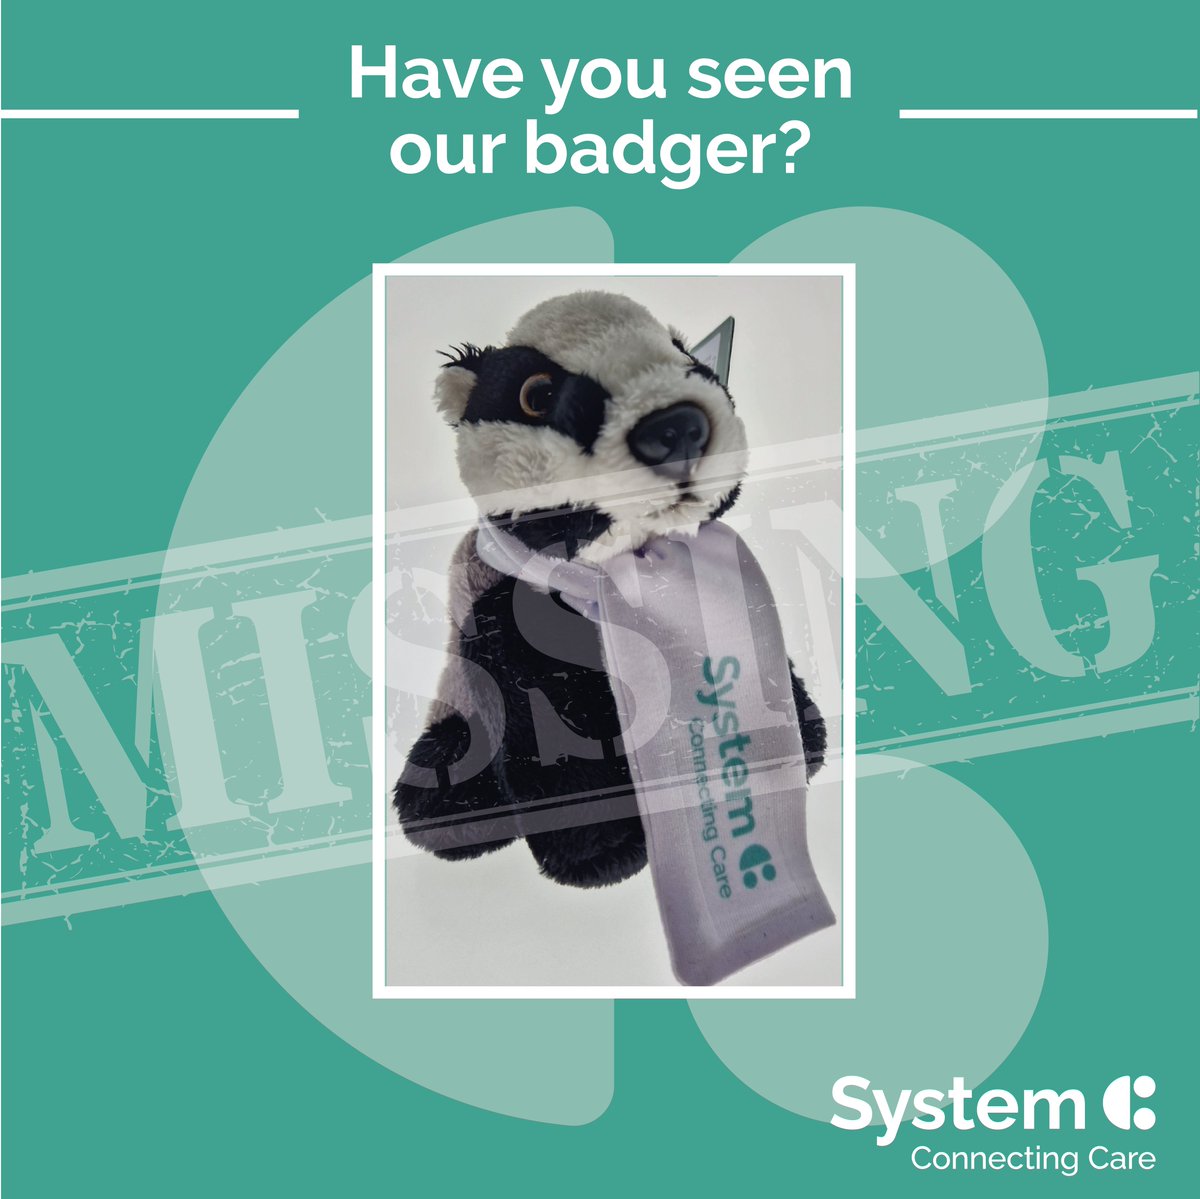 🚨Have you seen our badger?!🚨 Our little furry friend went missing from our Stand yesterday at #Rewired24! 🔎 We hope that they have found a new home! 🏡 But, if you find our 🦡 please let us know ASAP! 🙏